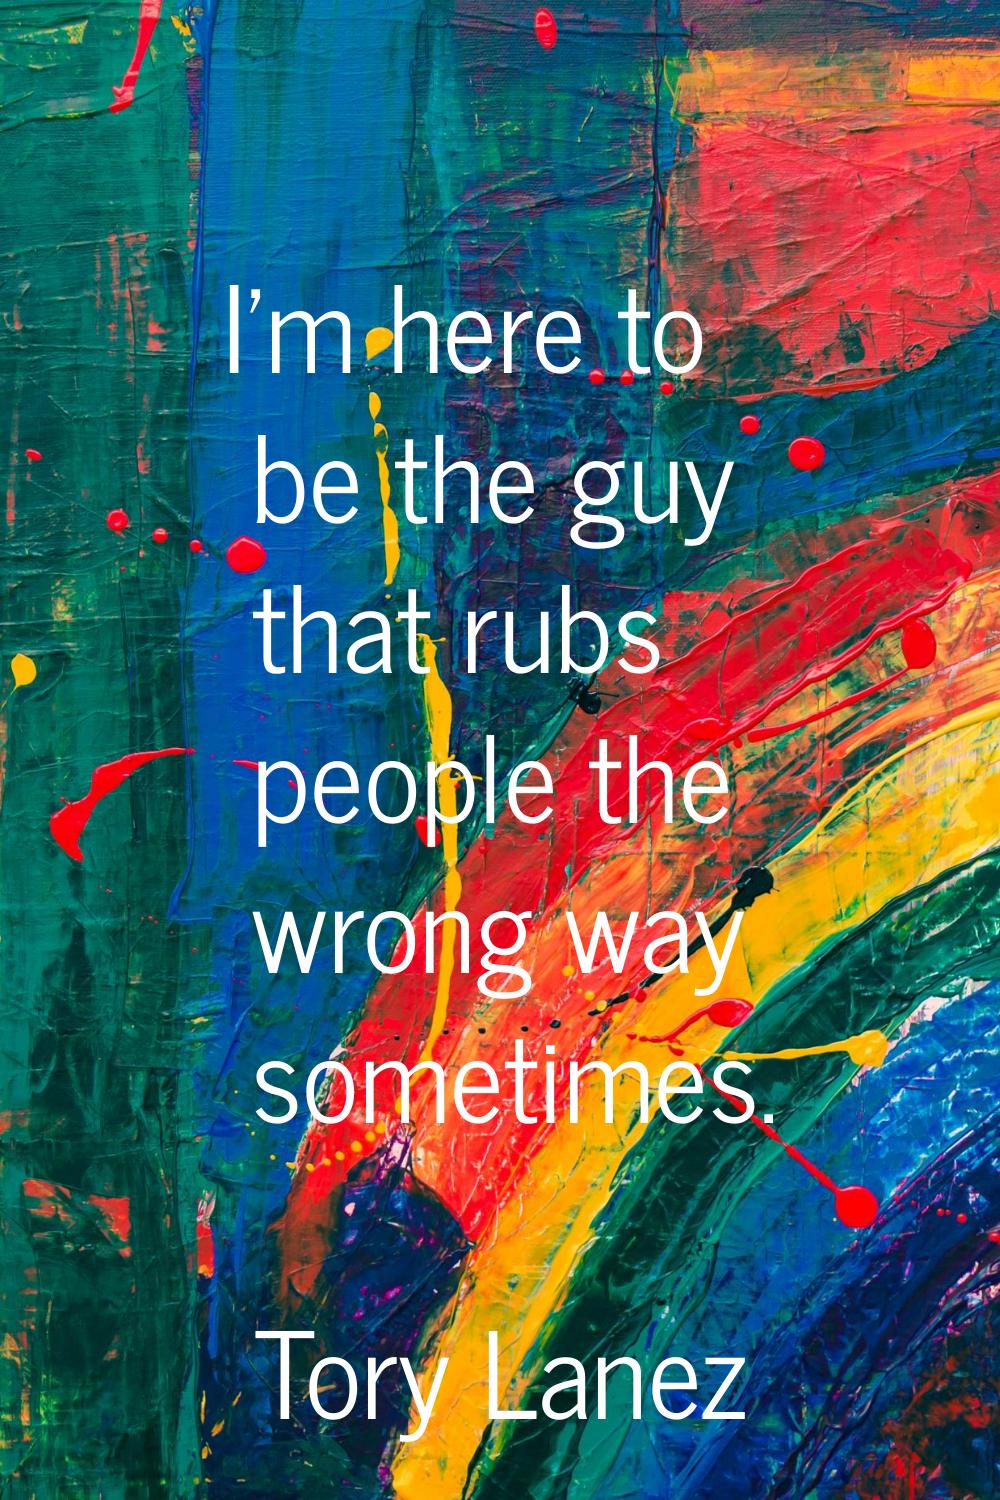 I'm here to be the guy that rubs people the wrong way sometimes.